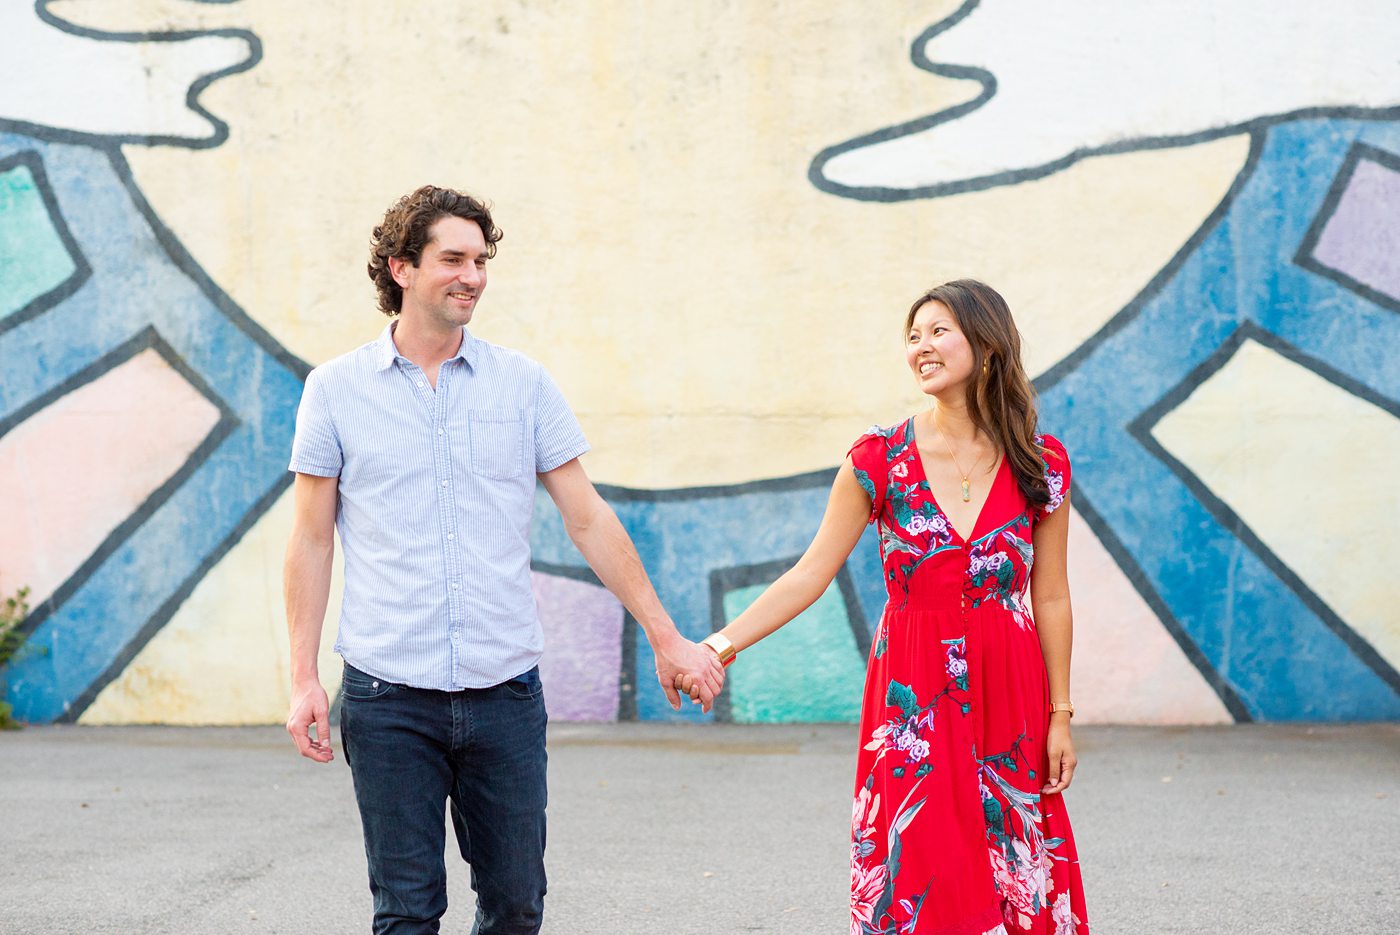 Durham North Carolina wedding photographer, Mikkel Paige Photography, captures engagement photos for a couple in the downtown area of the NC city. #mikkelpaige #DurhamEngagementPhotos #DowntownDurham #DurhamWeddingPhotographer